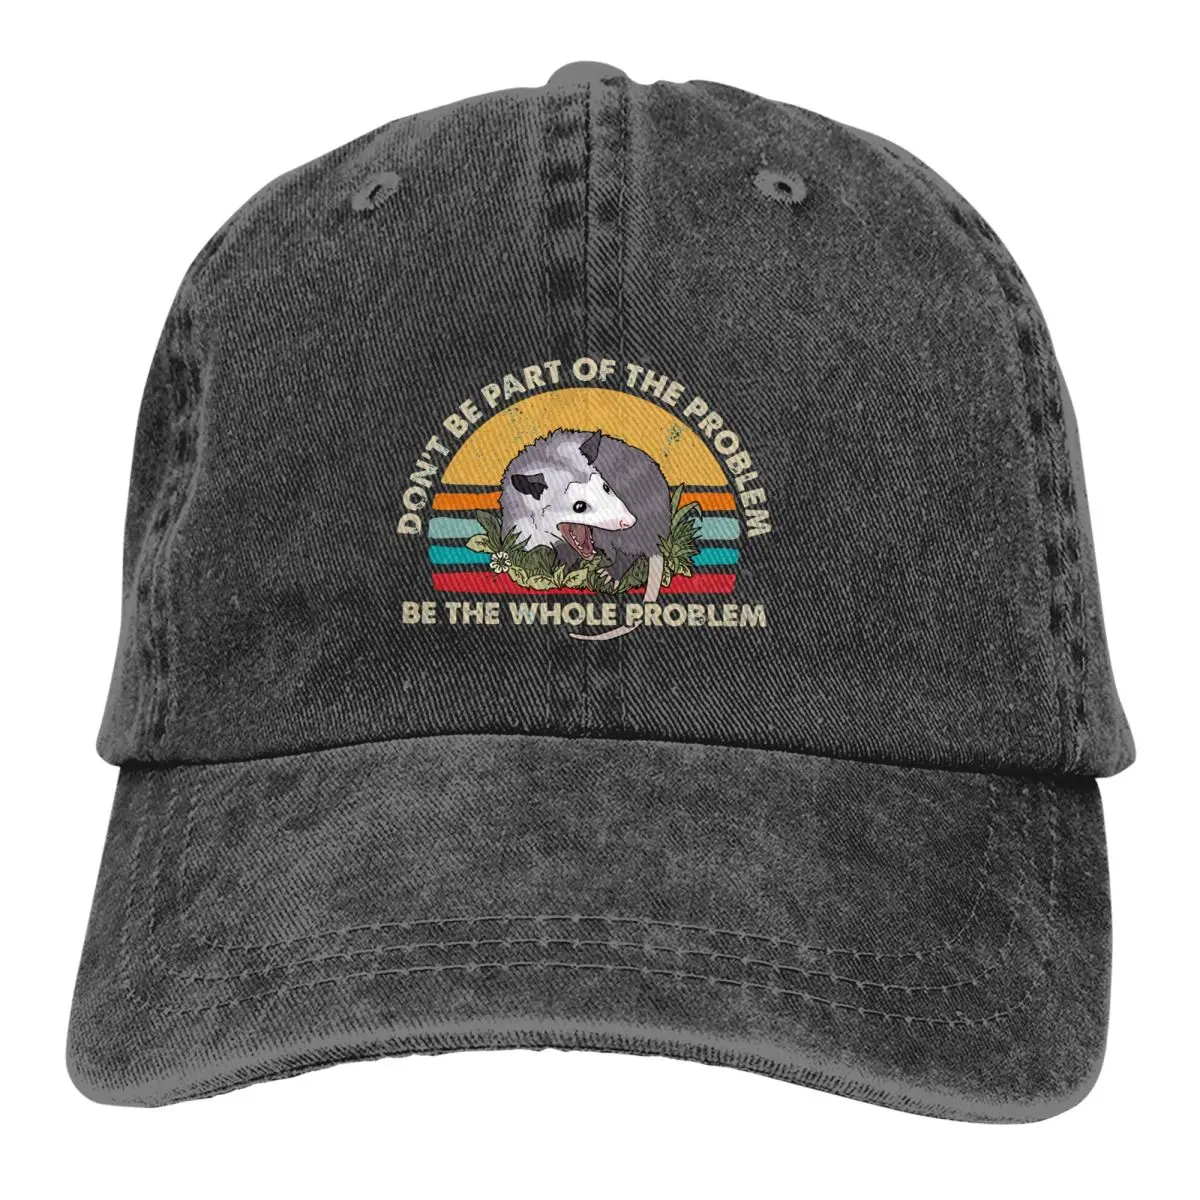 

Pure Color Dad Hats Don't Be Part Of The Problem Be The Whole Problem Women's Hat Sun Visor Baseball Caps Opossum Peaked Cap